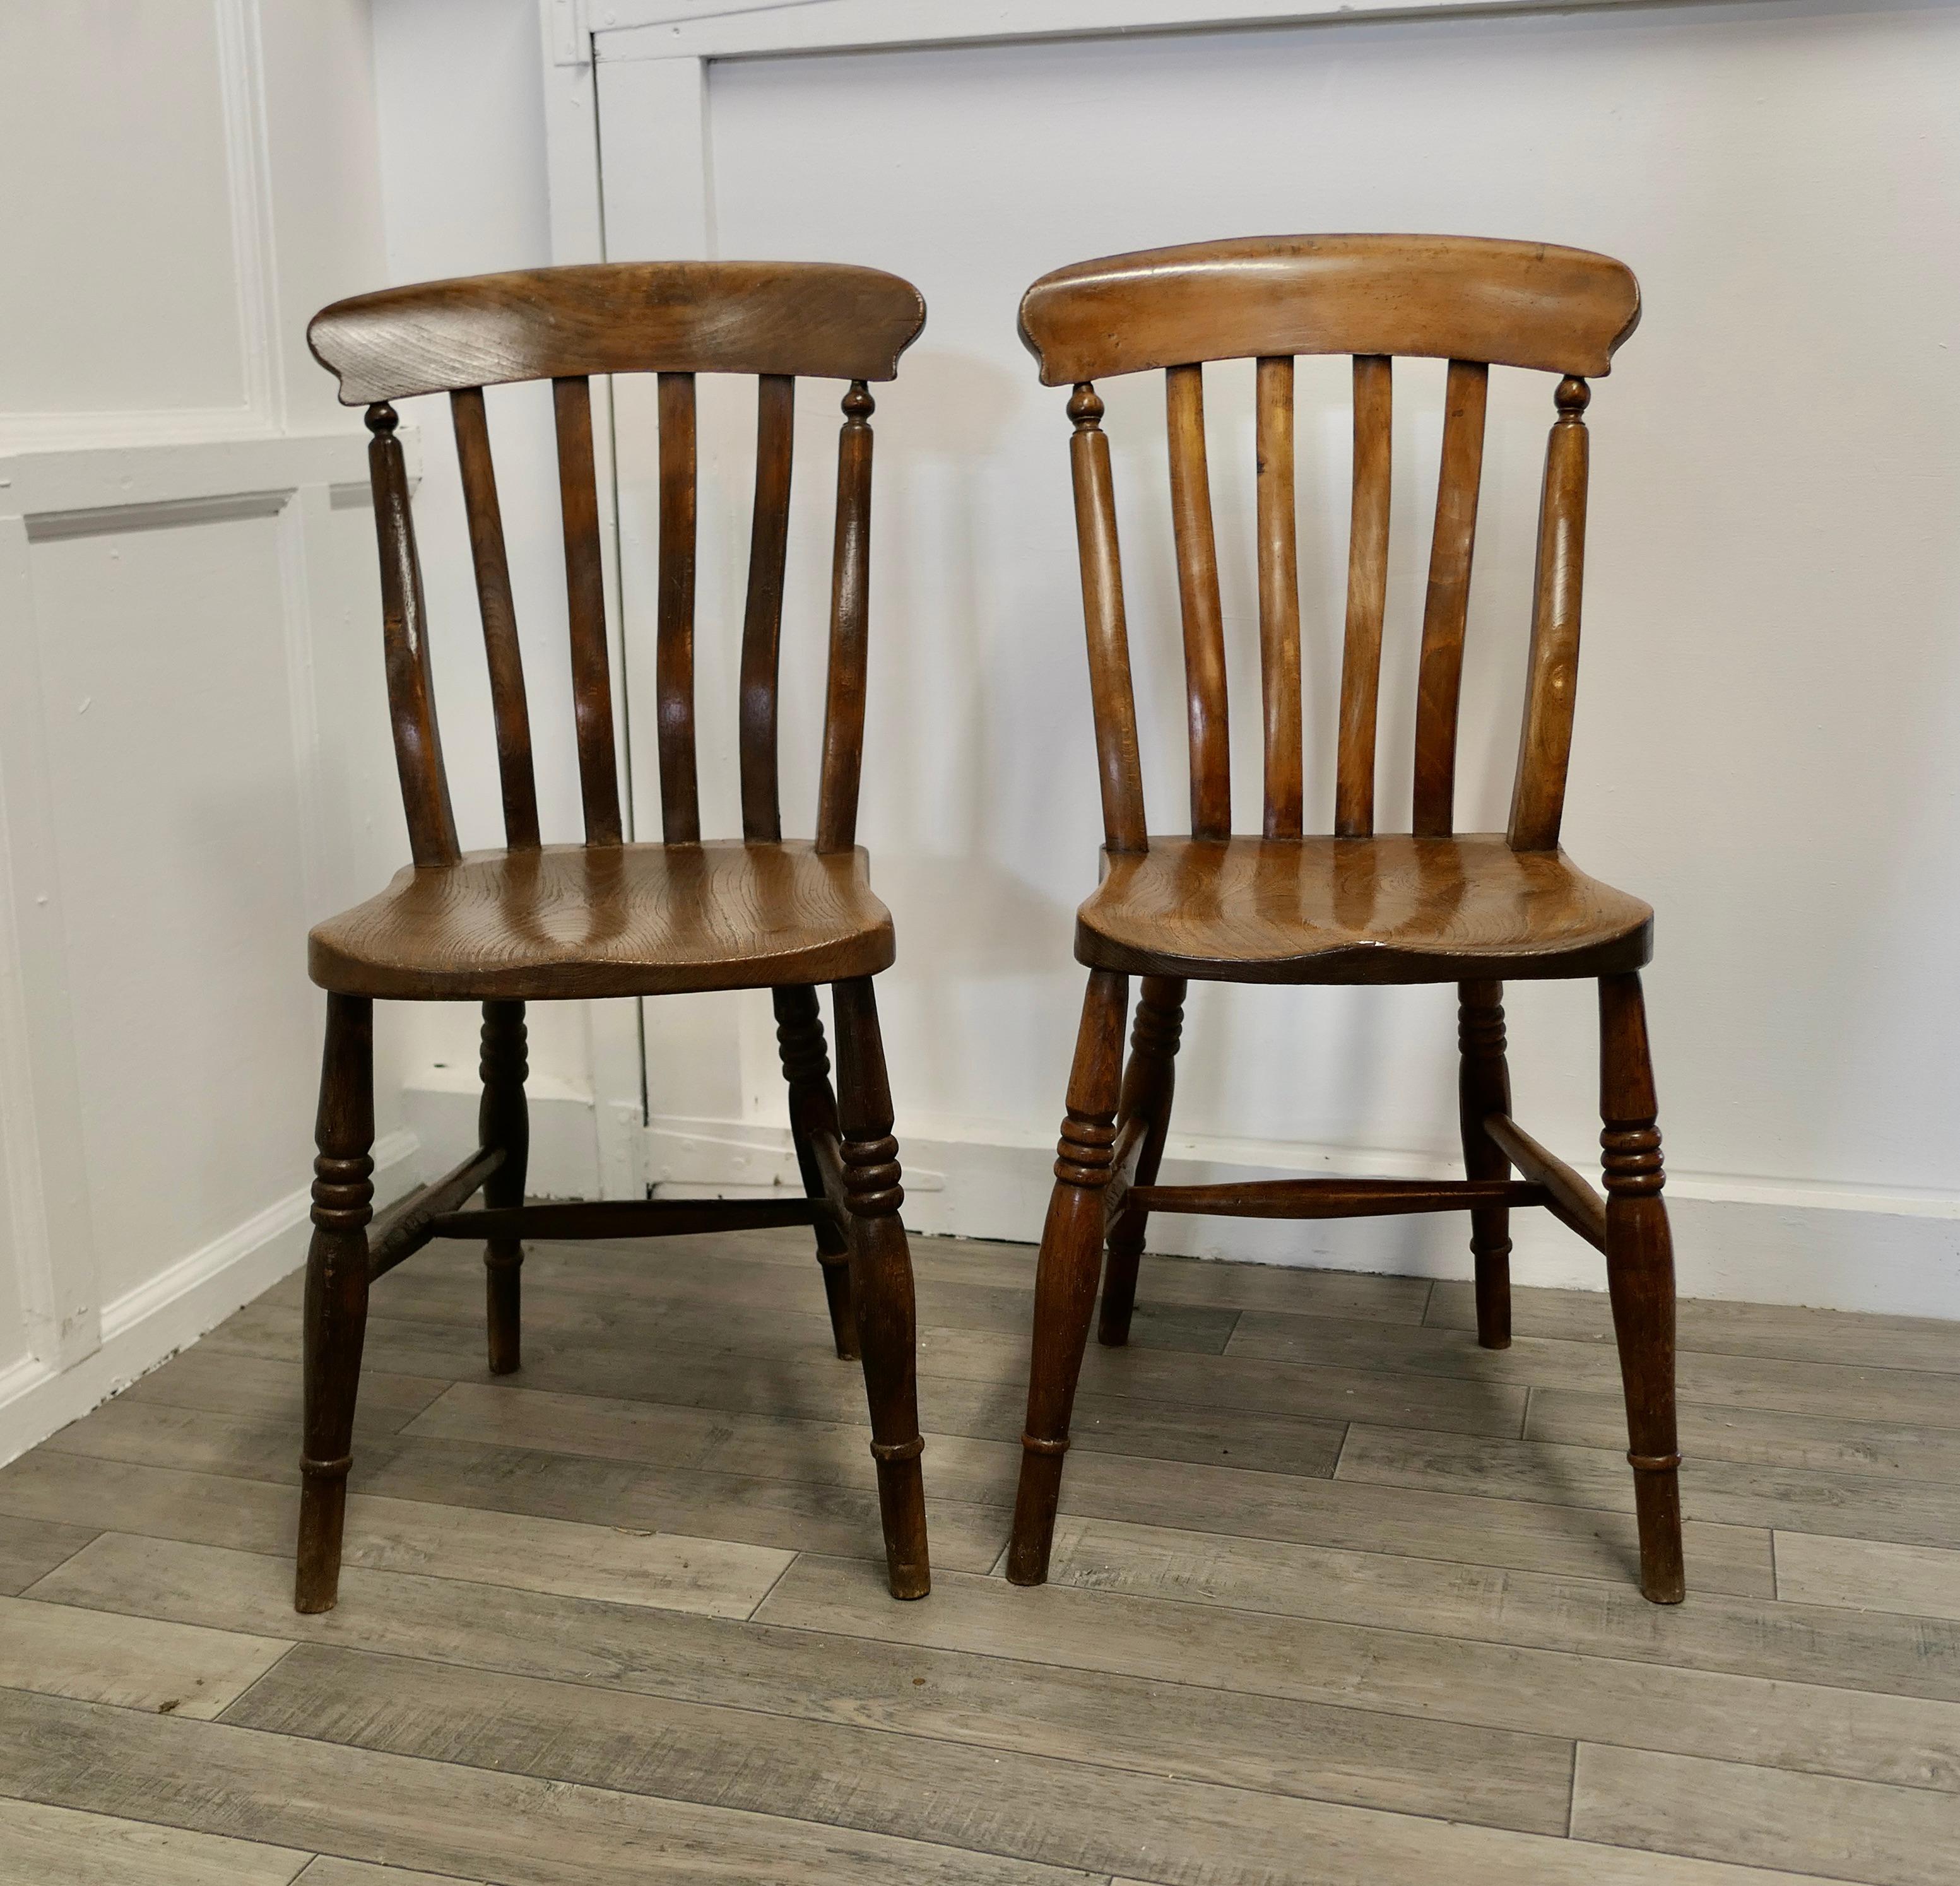 A pair of Victorian slat back farmhouse kitchen chairs

A good sturdy pair of Victorian slat back kitchen dining chairs
The chairs have solid elm seats and turned beech legs and stretchers 
This very attractive pair comes in their original wax